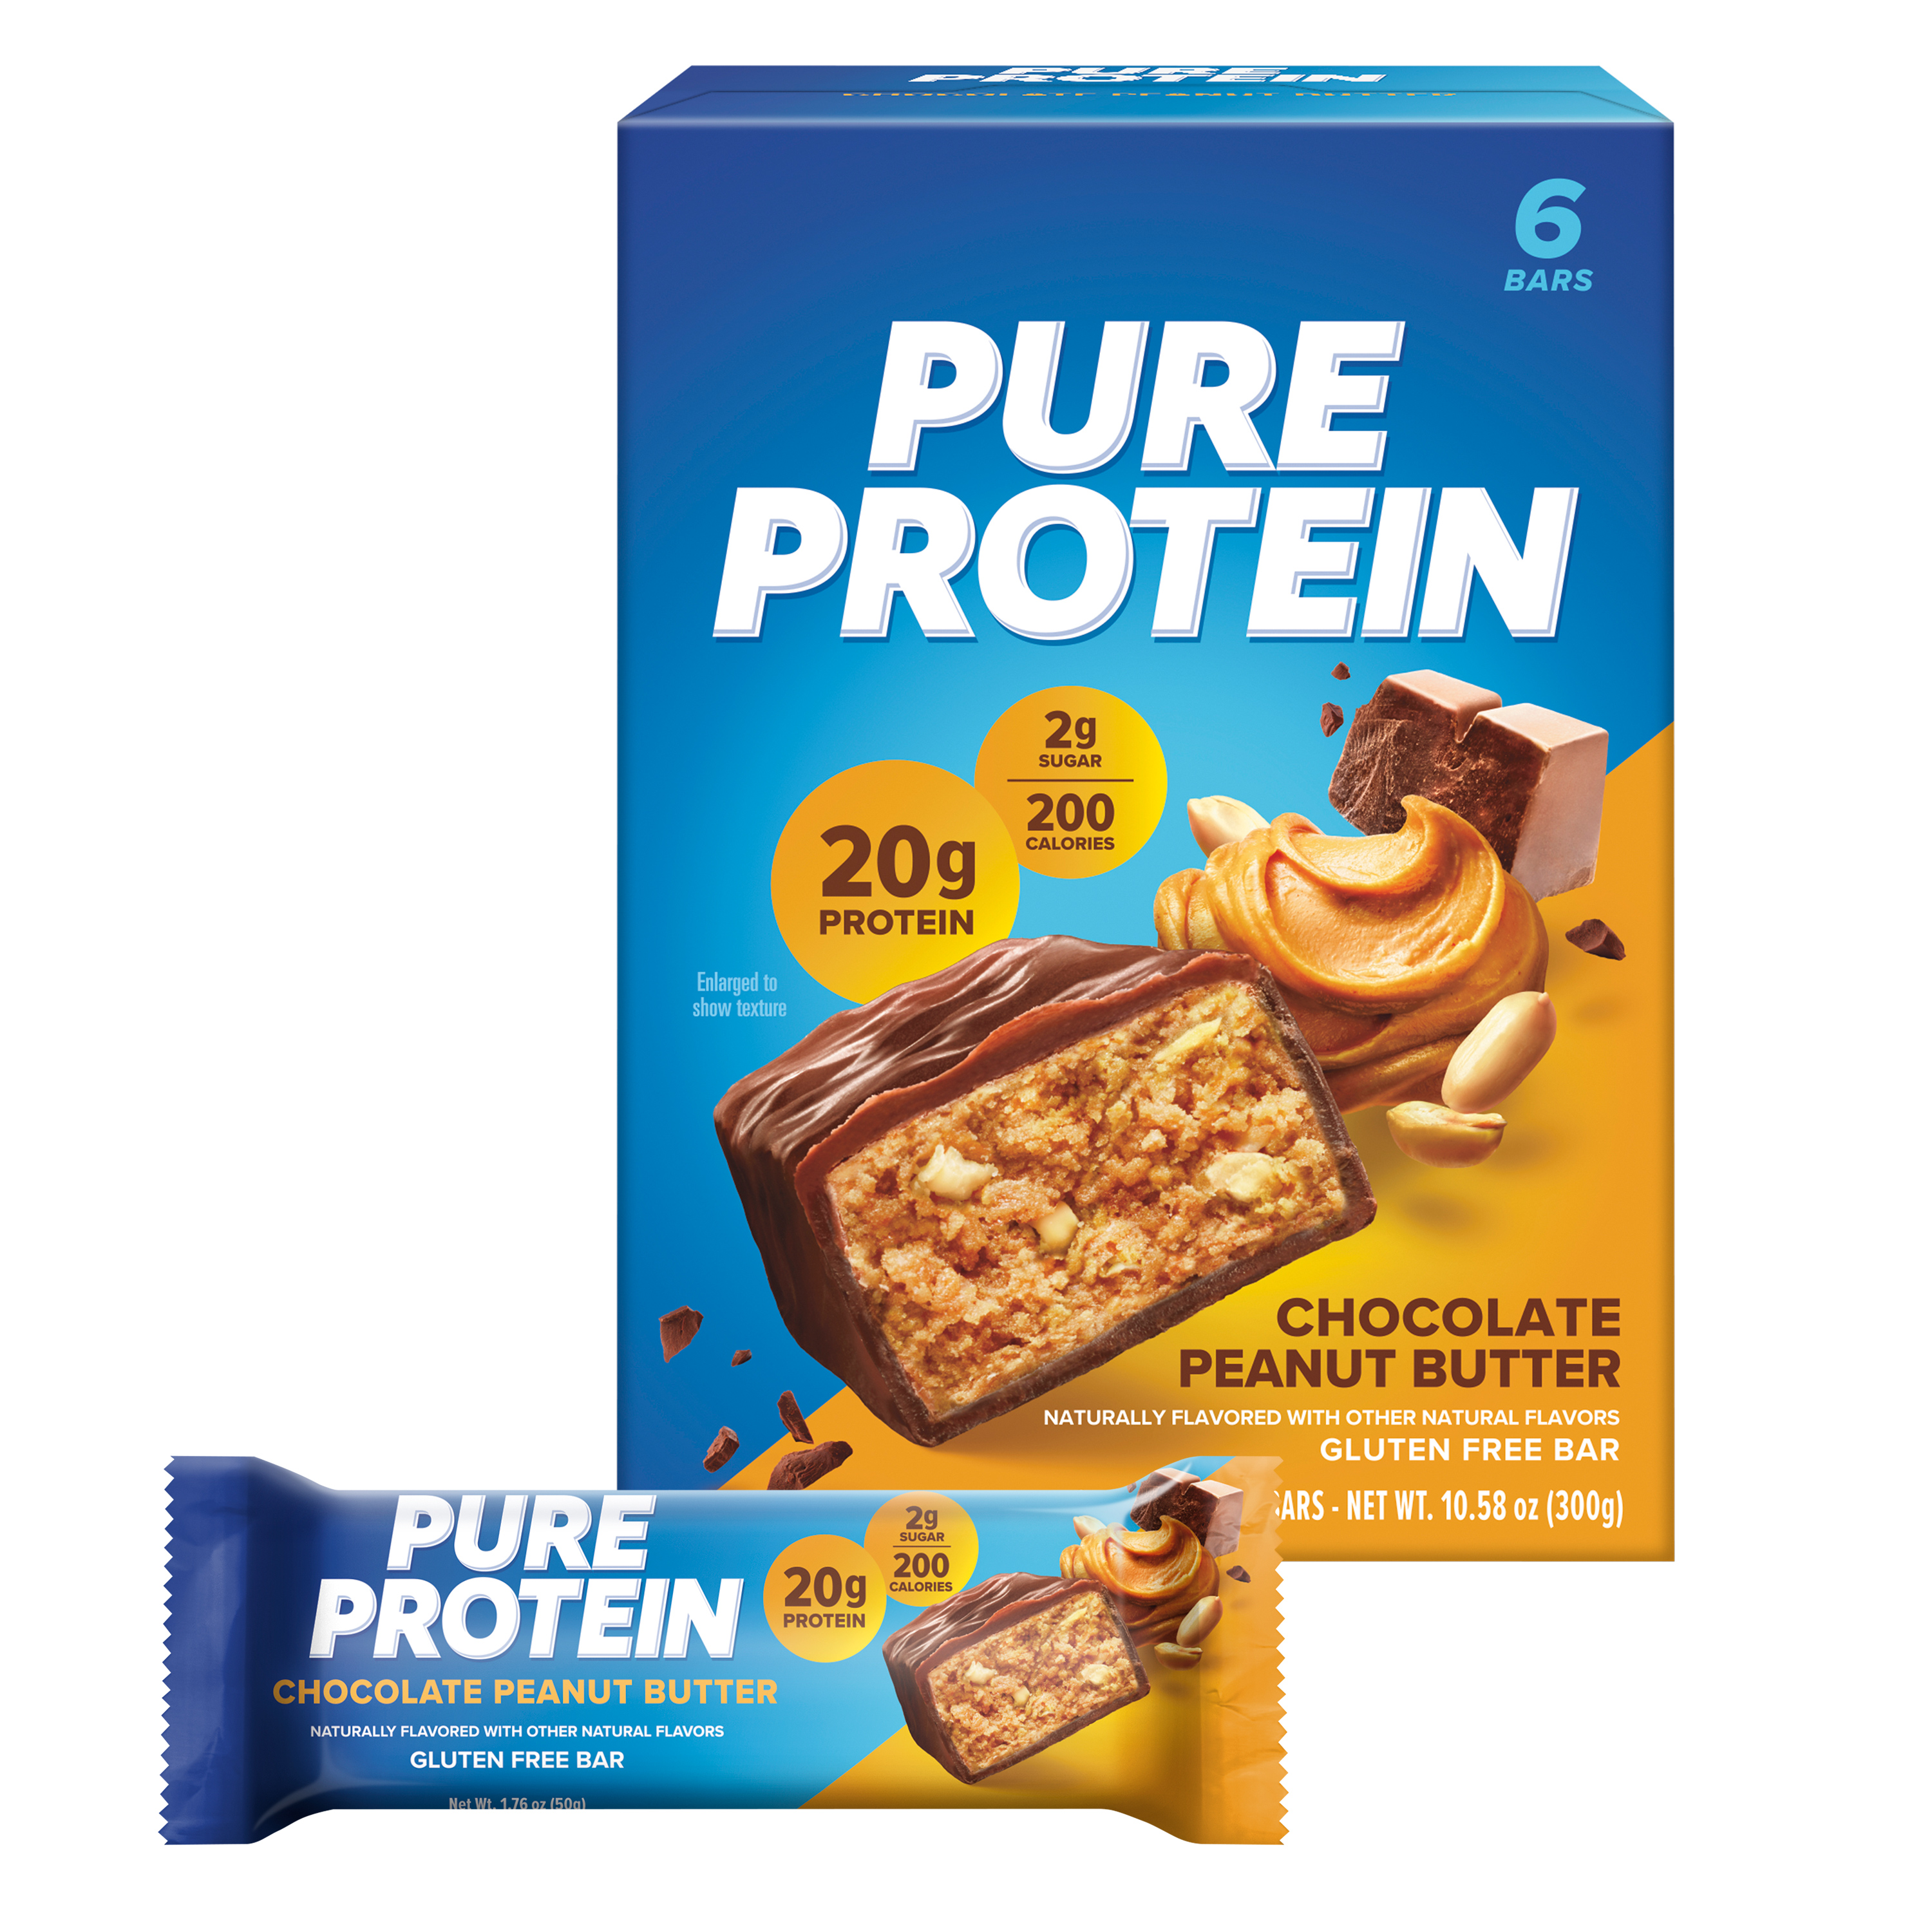 Pure Protein Bars, Chocolate Peanut Butter, 20g Protein, Gluten Free, 1.76 oz, 6 Ct - image 1 of 6